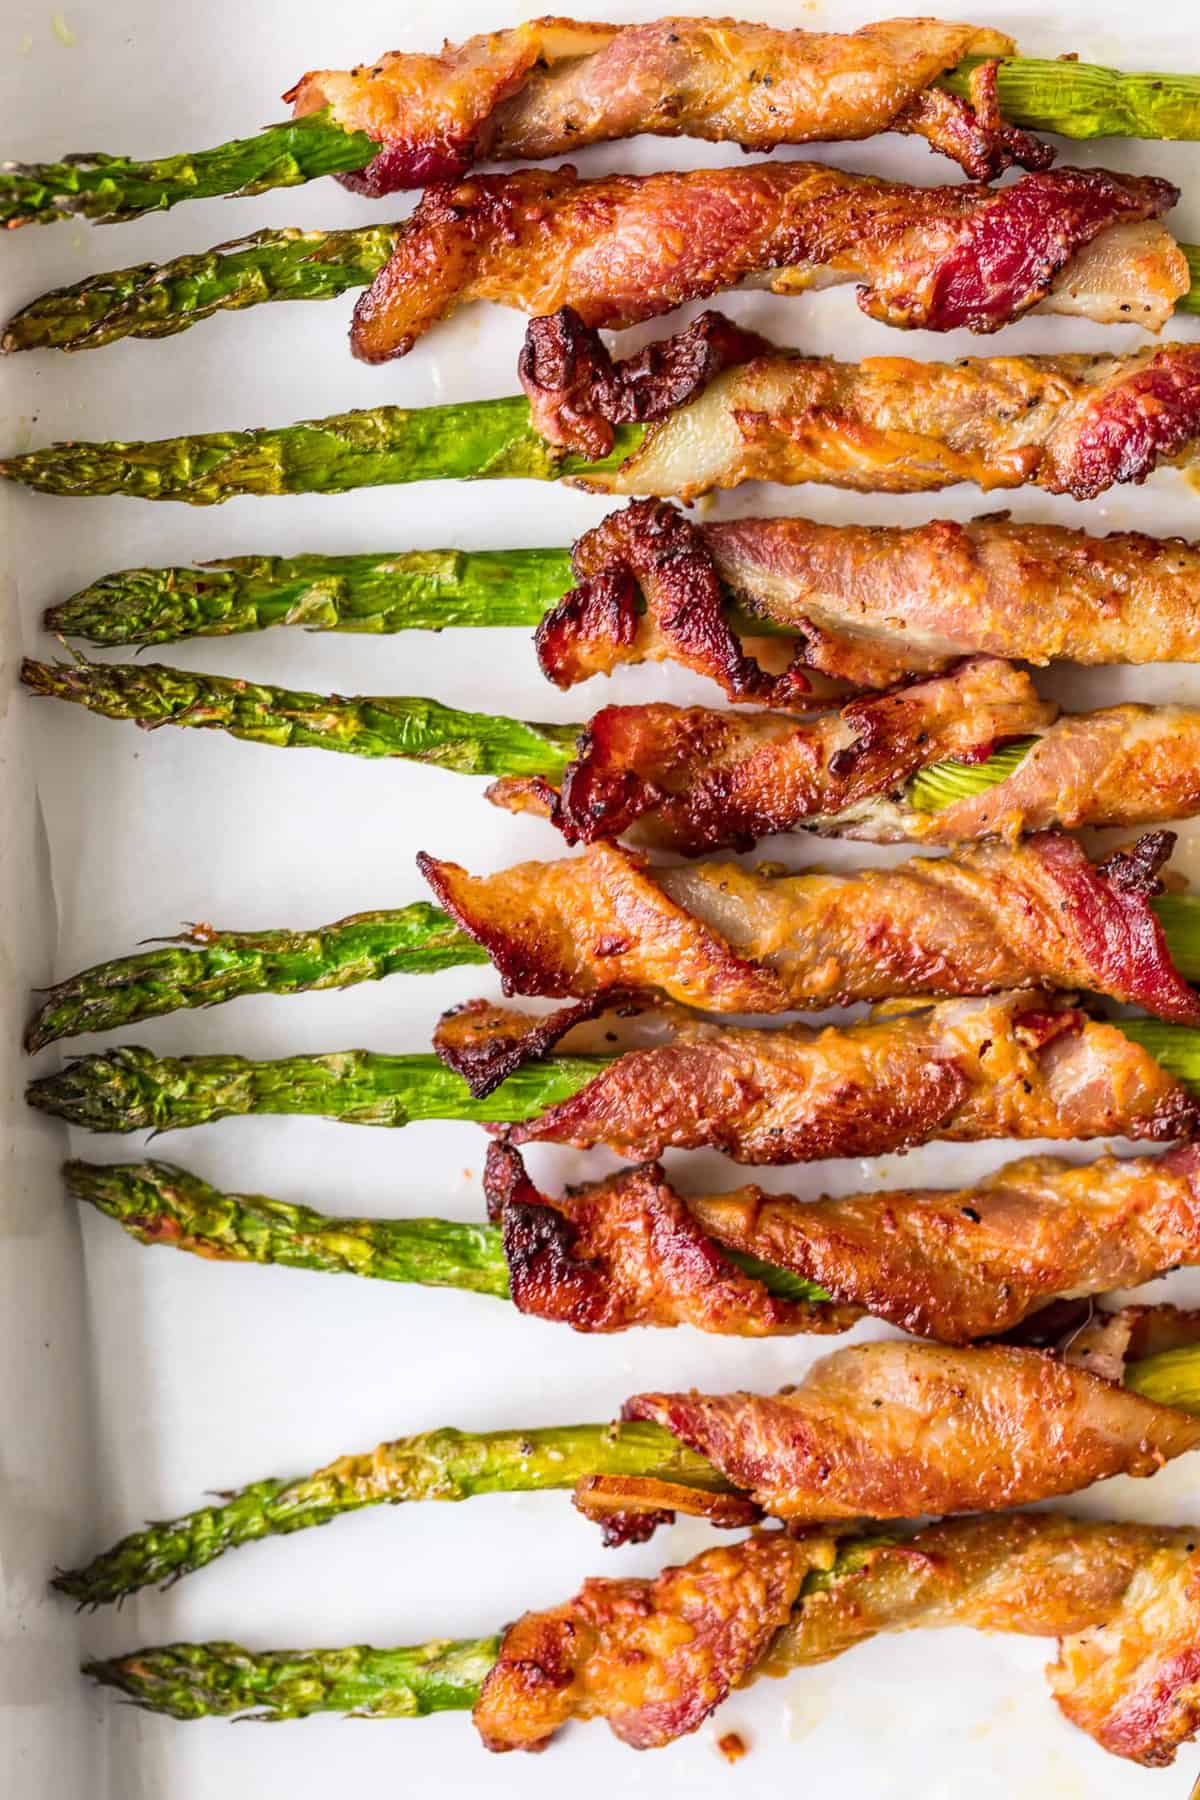 Baked Bacon Wrapped Asparagus ready to serve